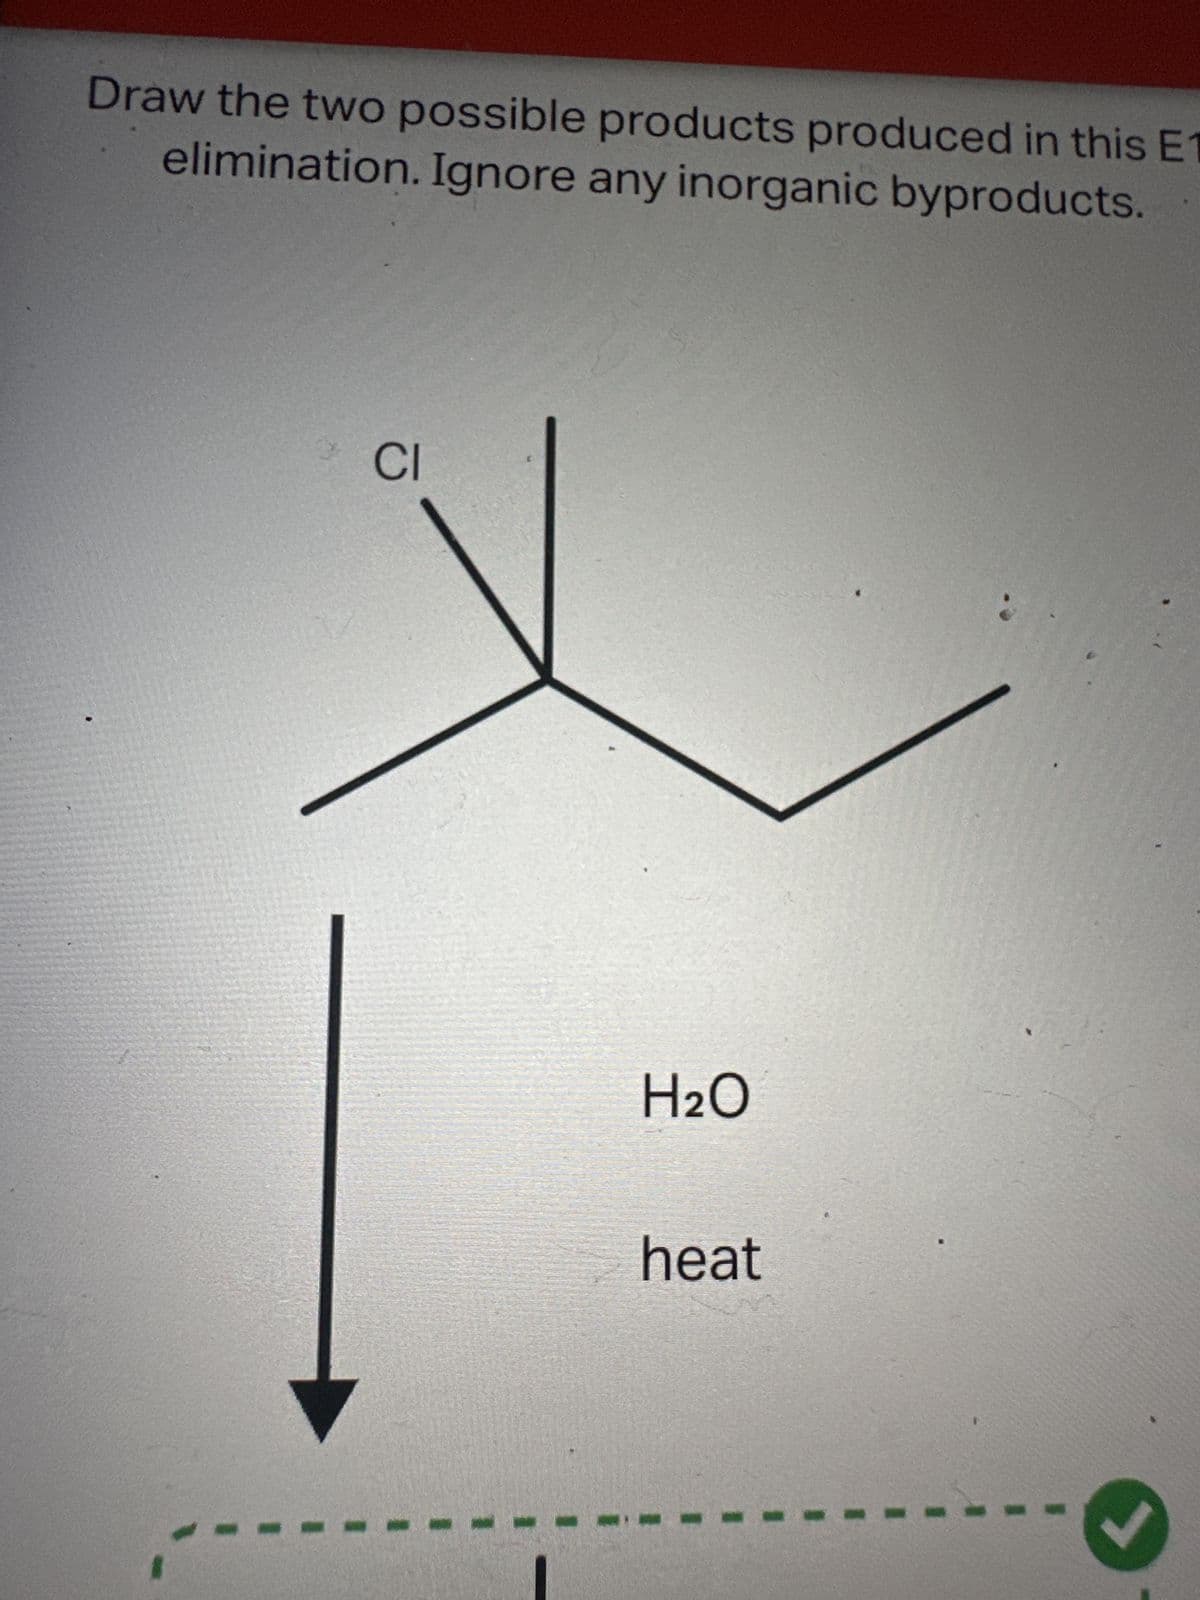 Draw the two possible products produced in this E1
elimination. Ignore any inorganic byproducts.
CI
H₂O
heat
J